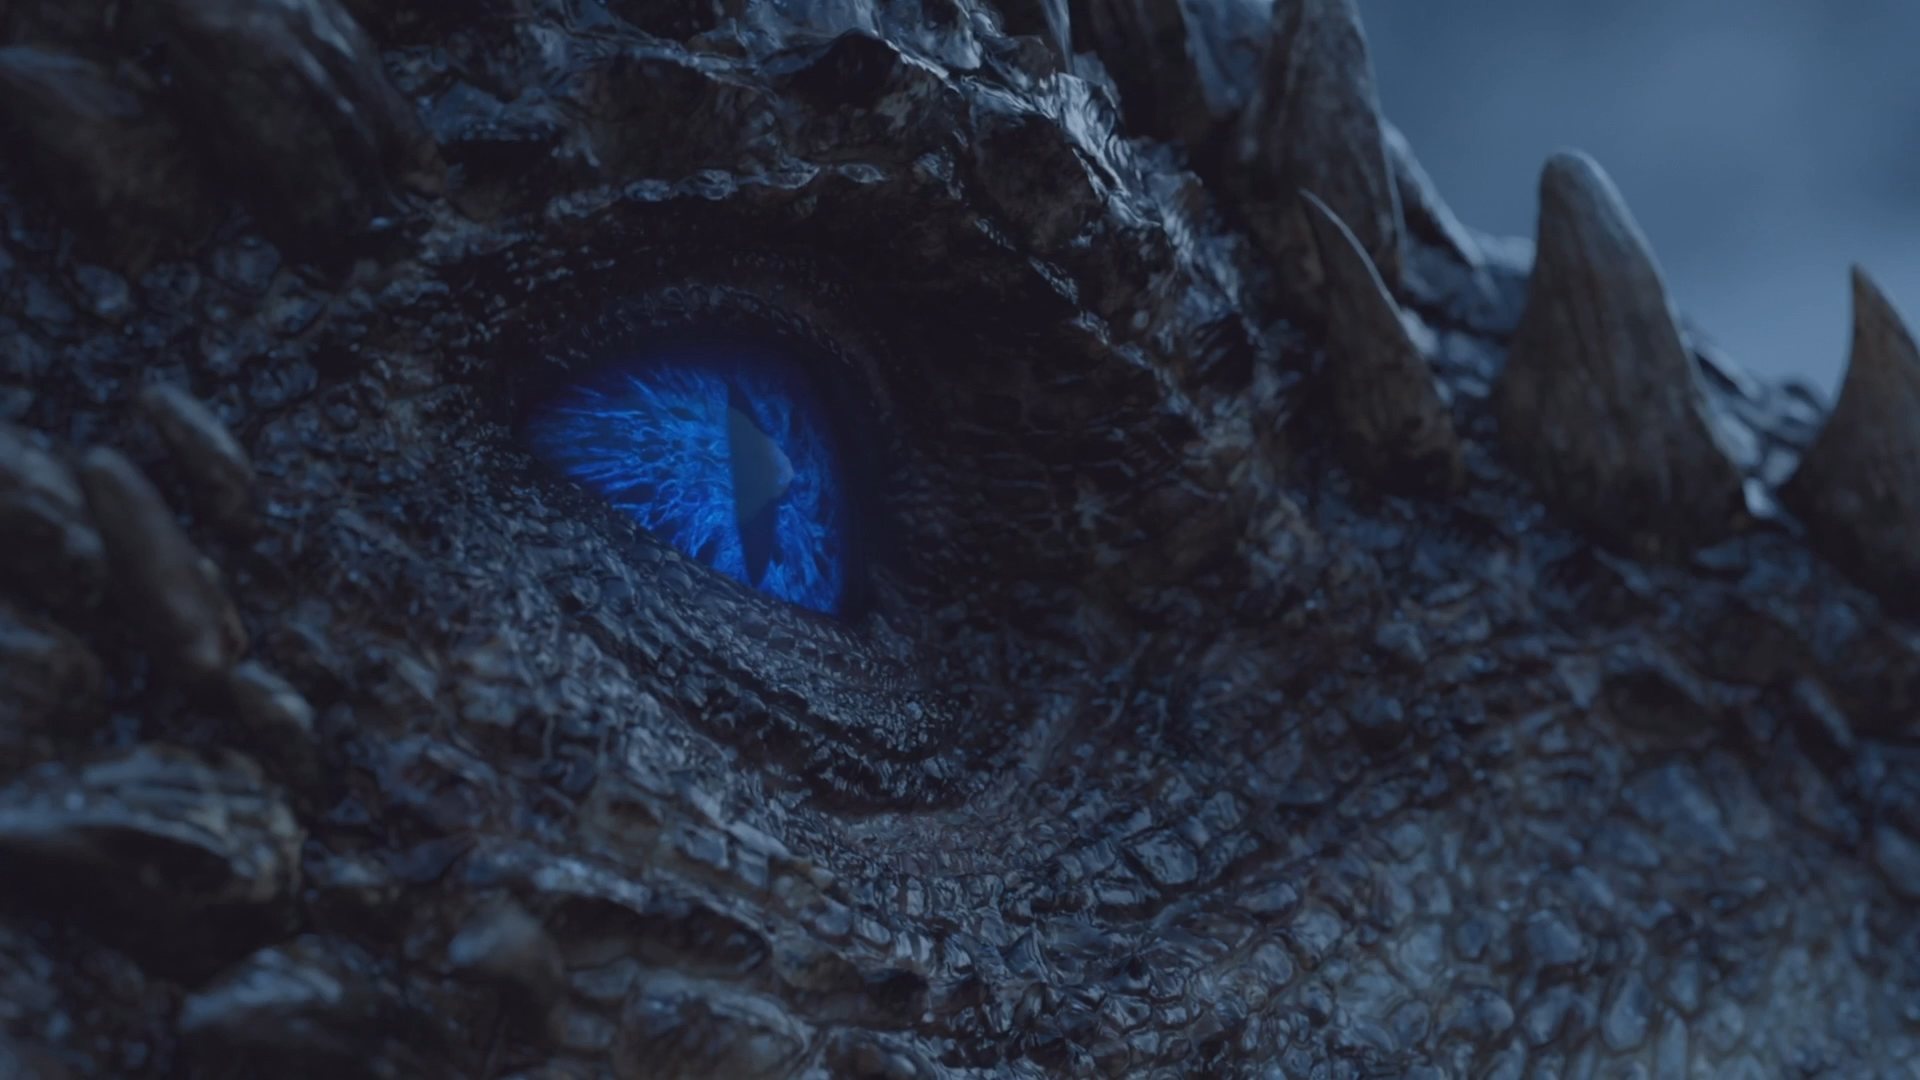 General 1920x1080 Game of Thrones dragon A Song of Ice and Fire HBO blue